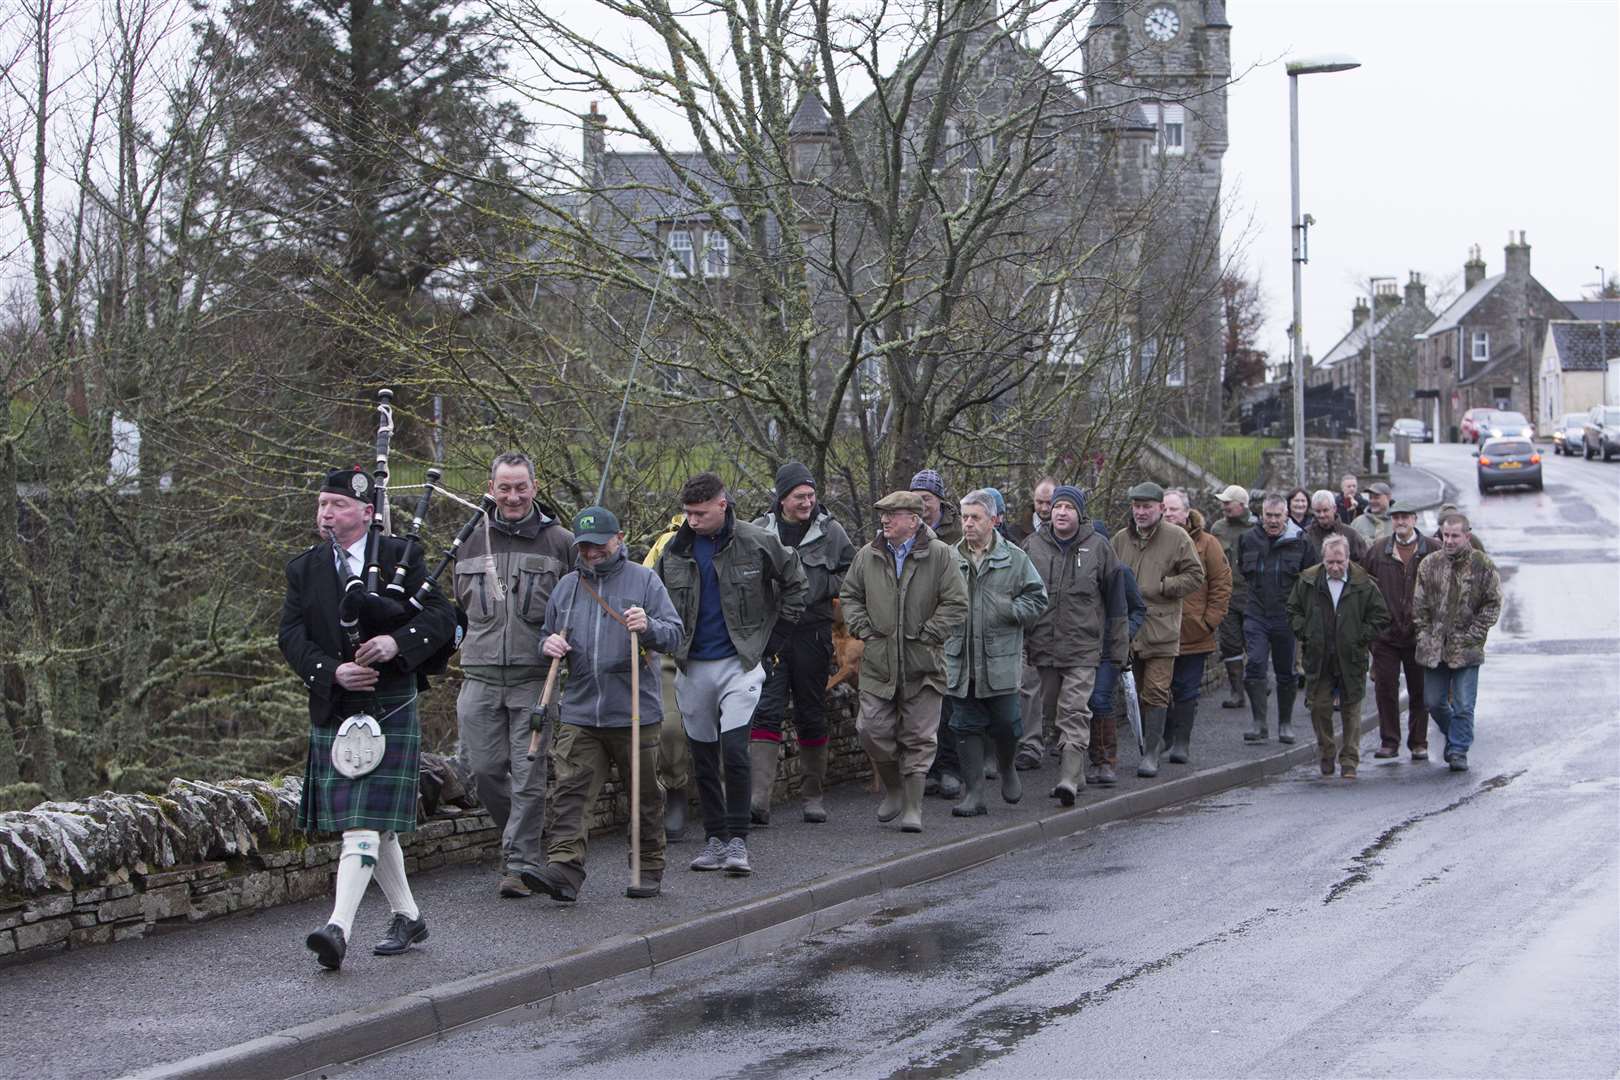 Piper Alasdair Miller leads anglers over Halkirk Bridge towards the River Thurso for the opening of the salmon season on Saturday morning. Picture: Robert MacDonald / Northern Studios